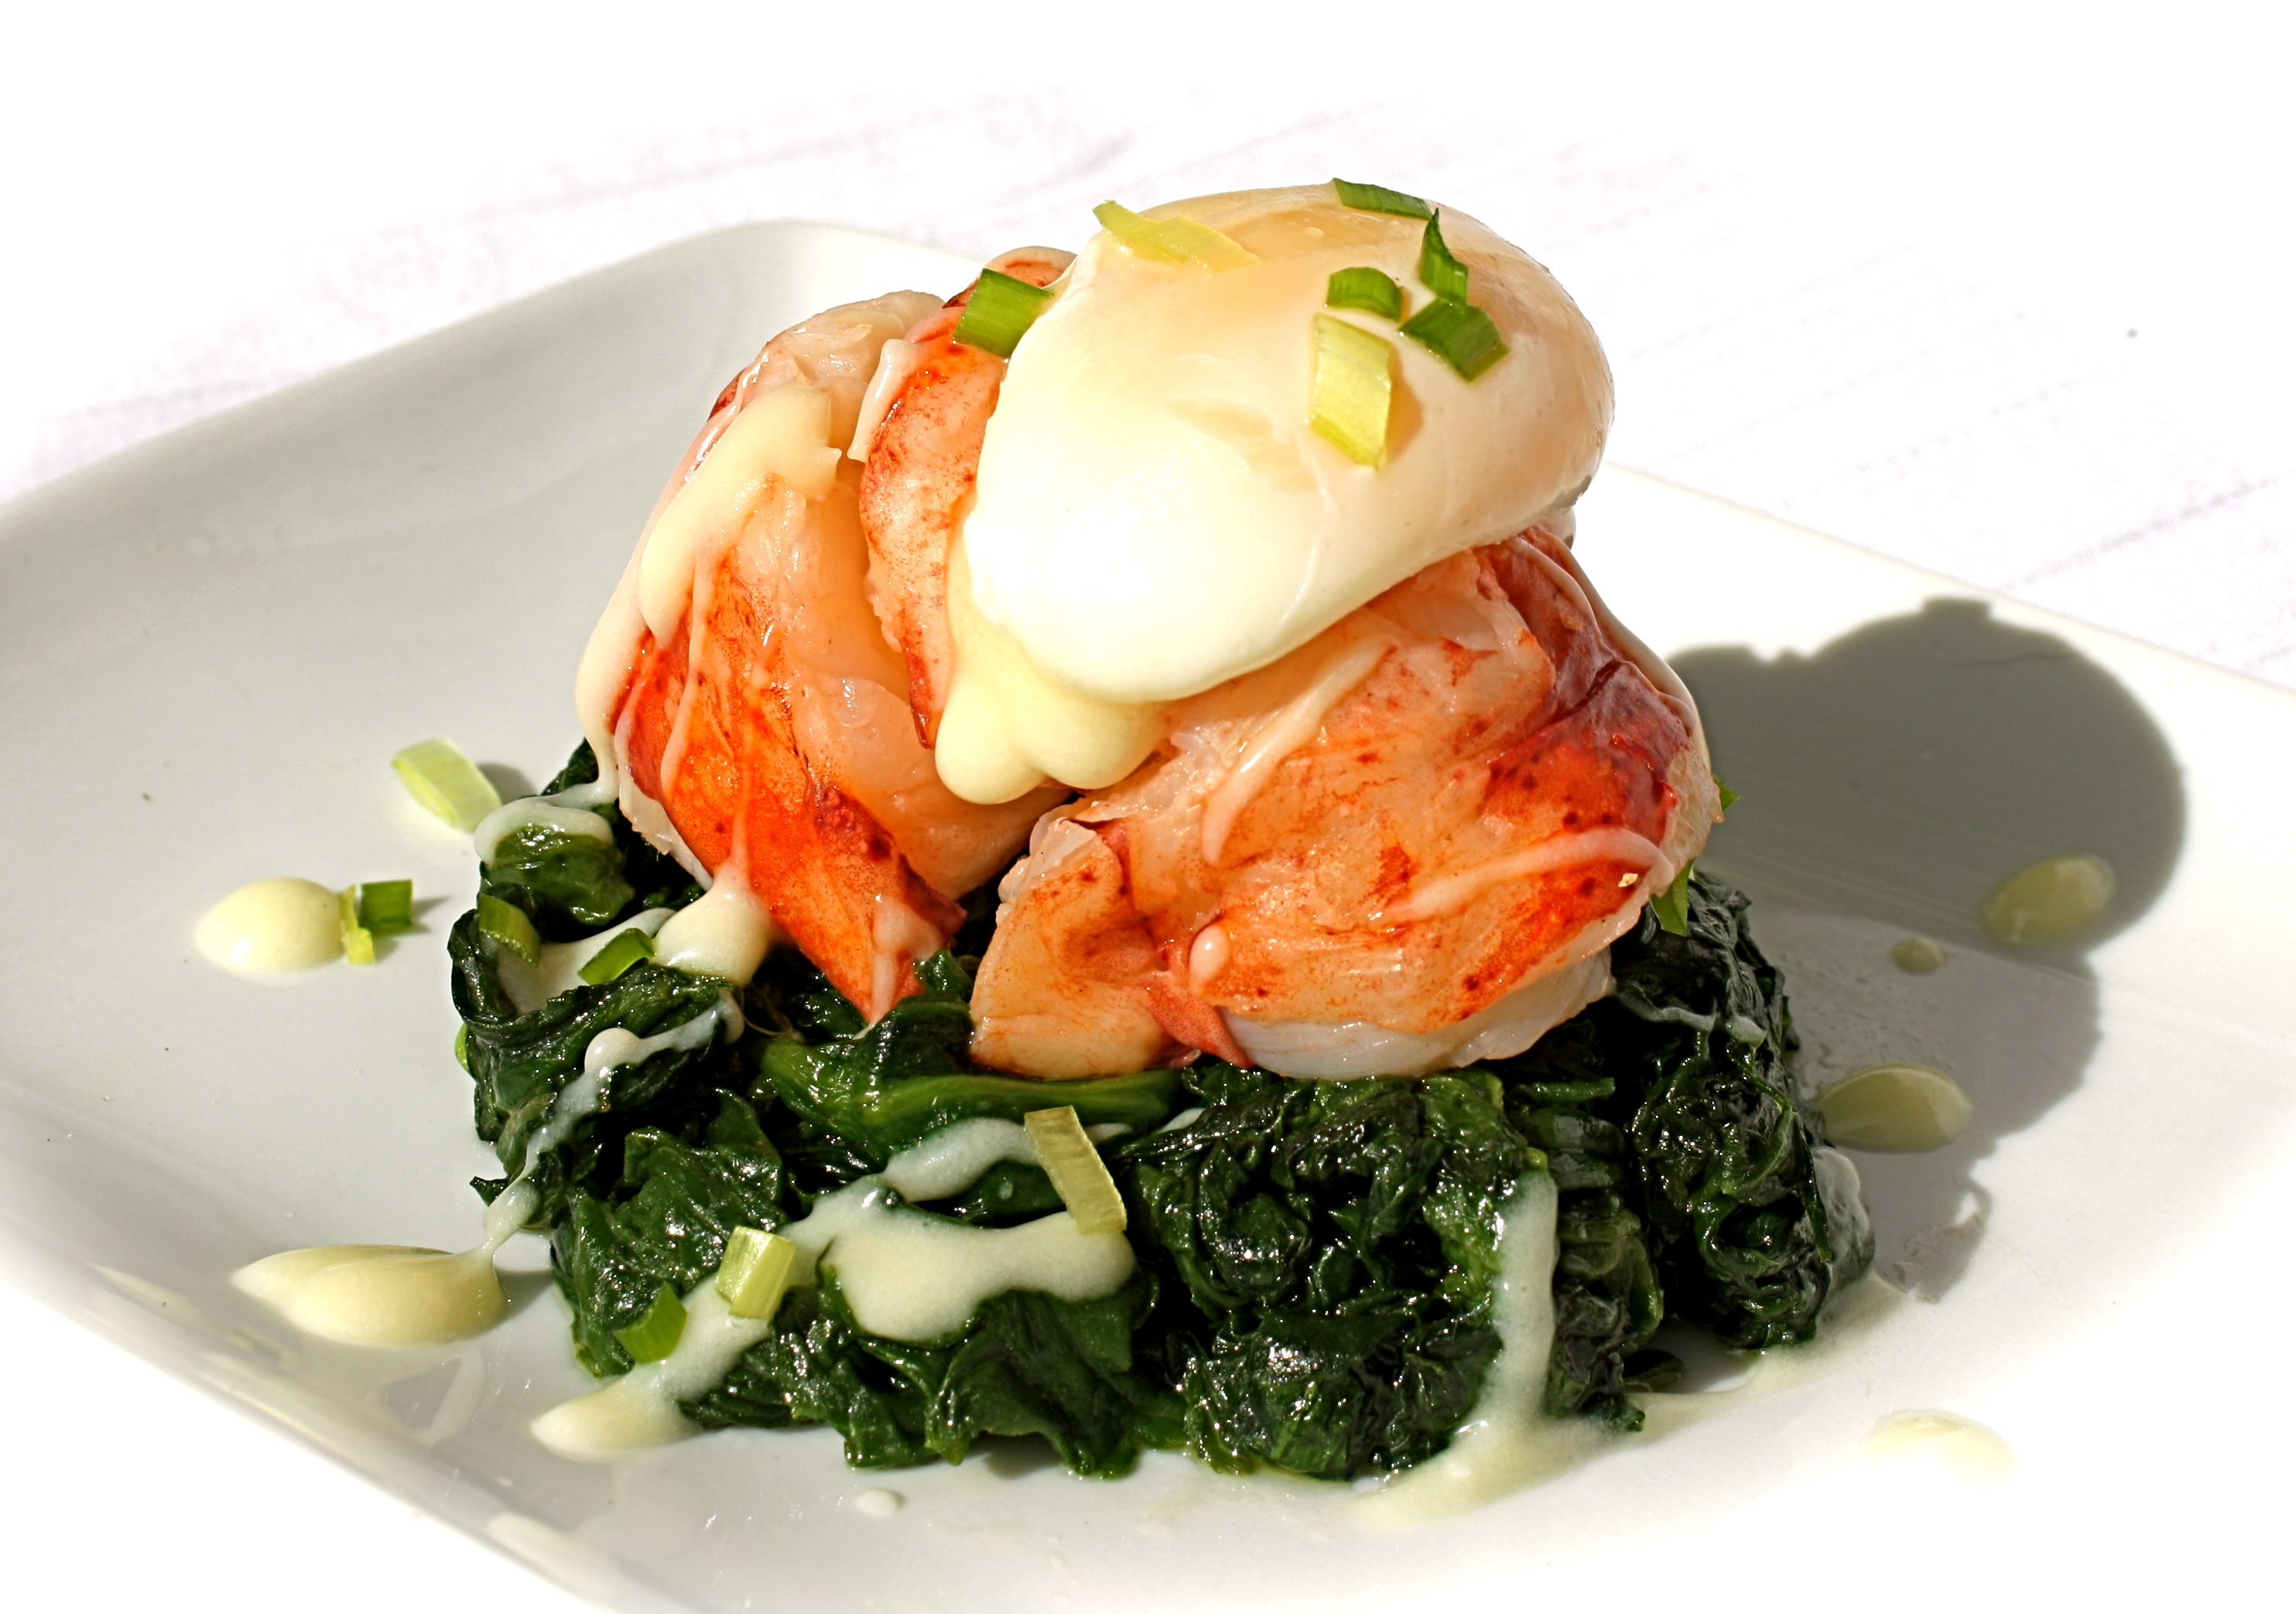 butter-poached-lobster-on-a-bed-of-garlic-spinach-topped-with-a-poached-quail-egg-and-beurre-blanc.jpg